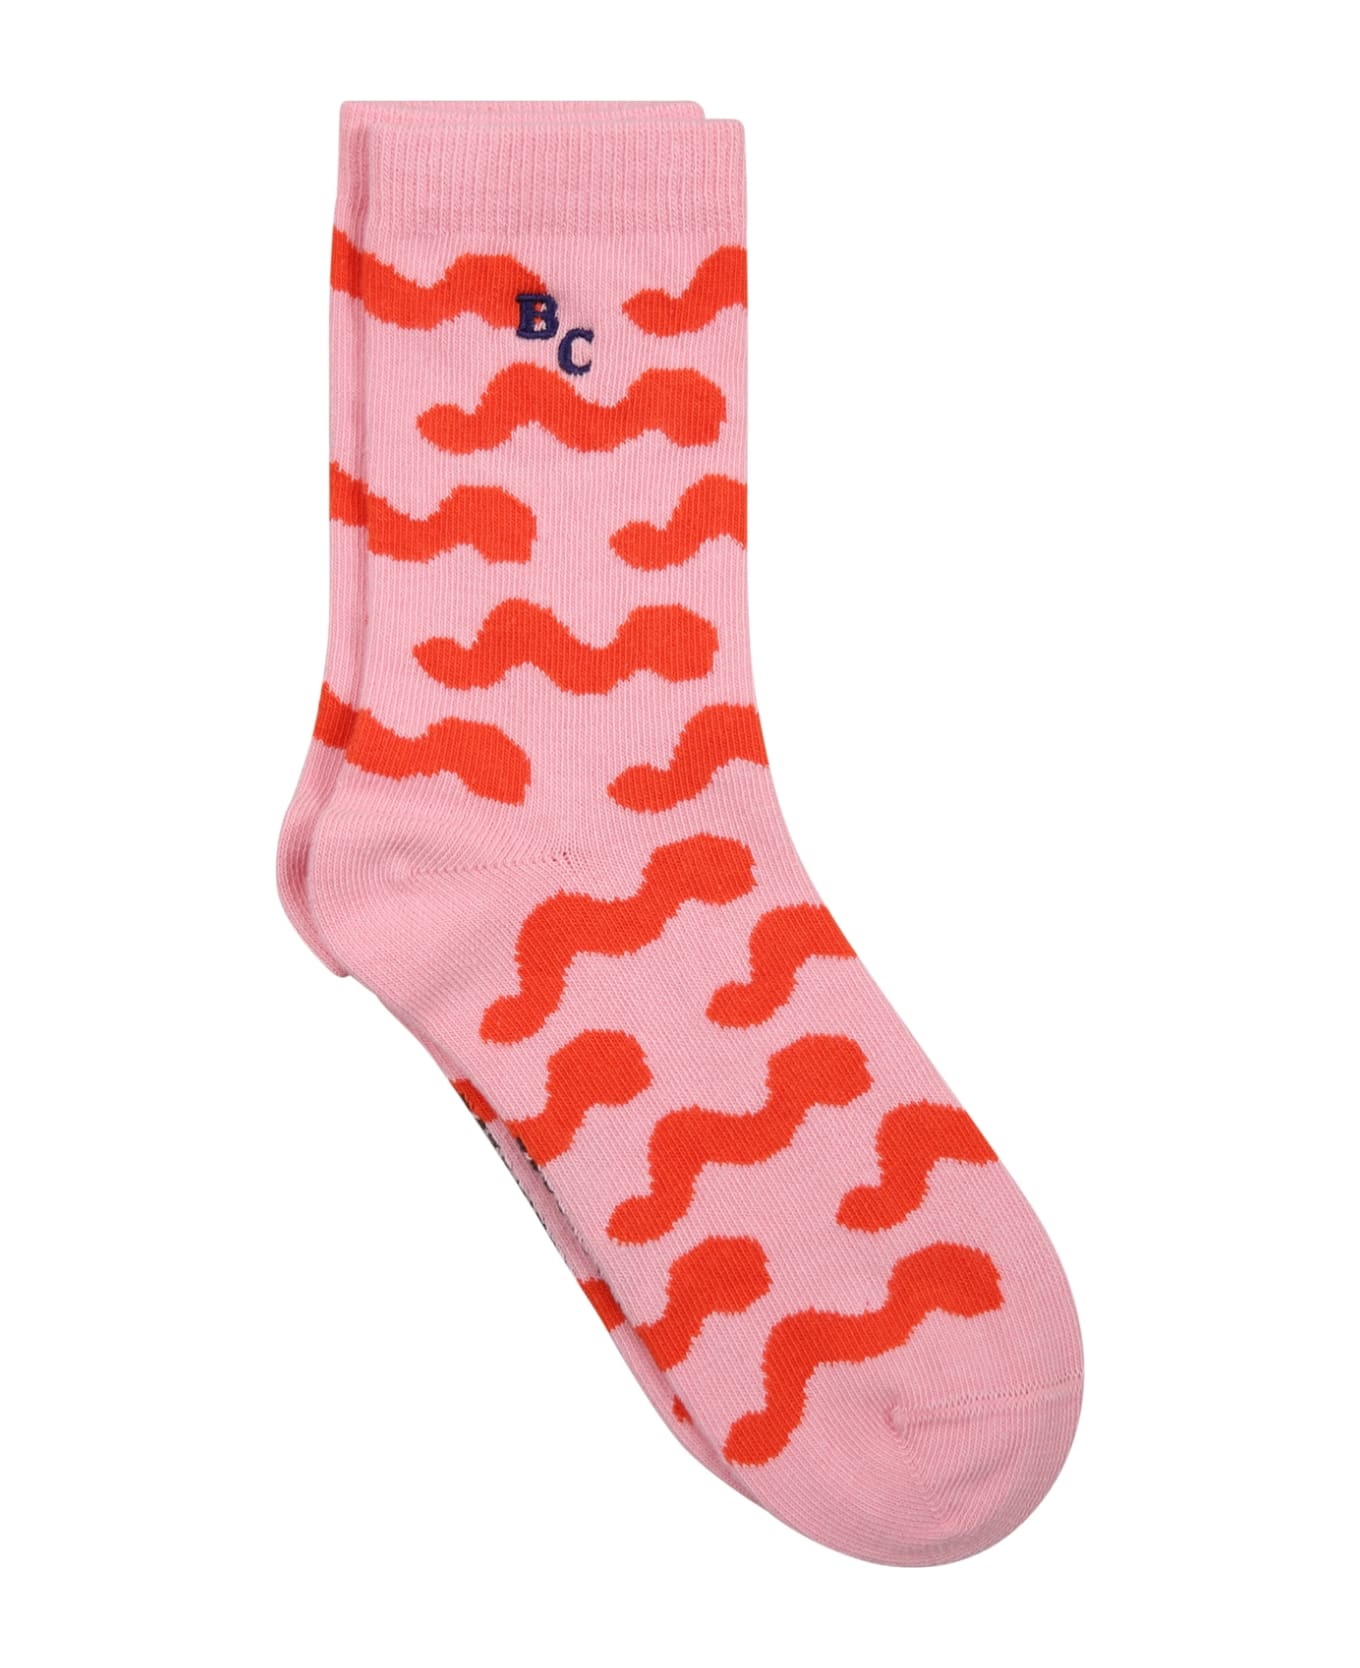 Bobo Choses Pink Socks For Girl With Red Waves And Logo - Pink シューズ